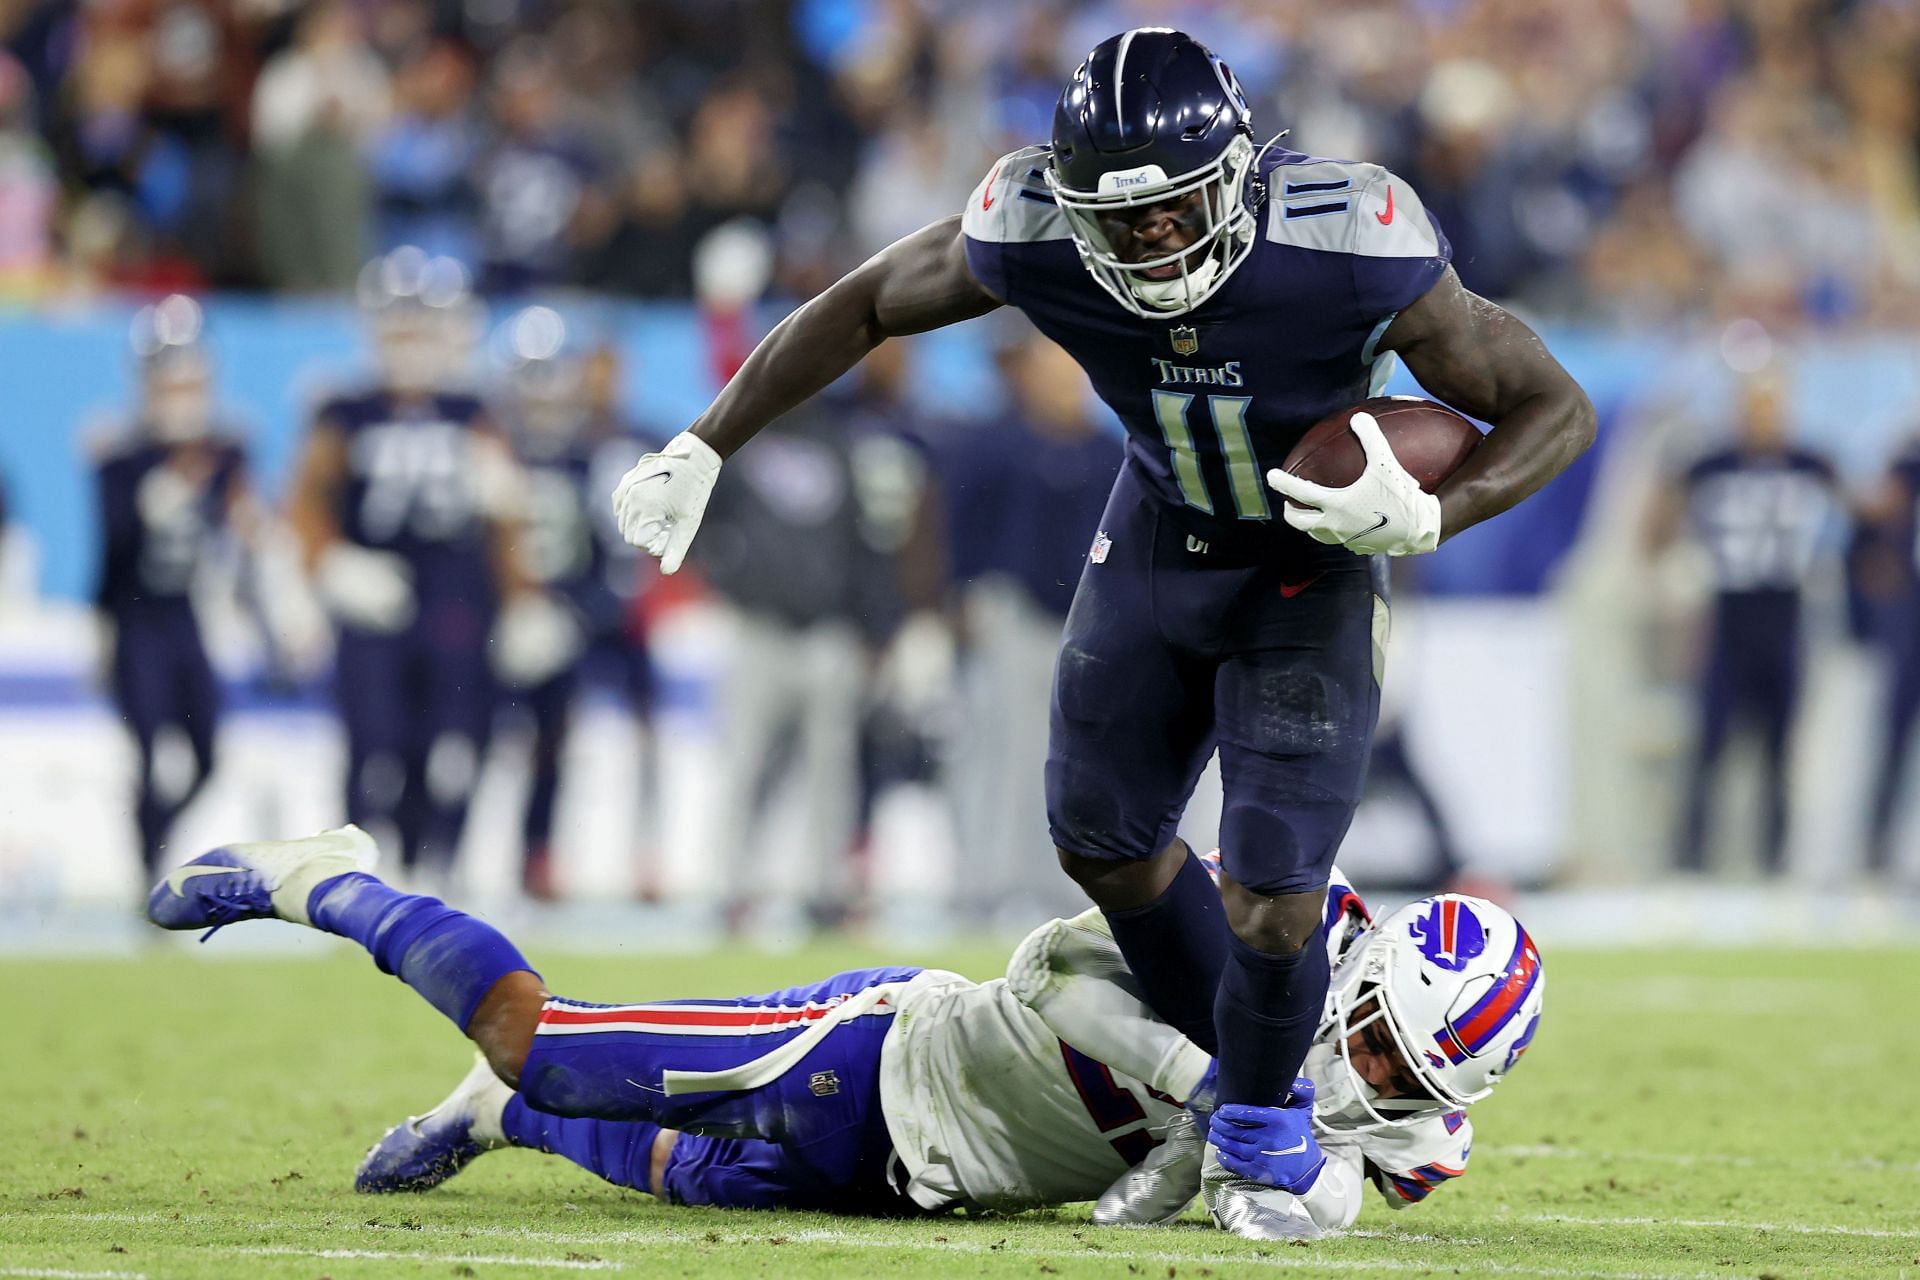 A.J. Brown spilled the beans on the Titans offense after being